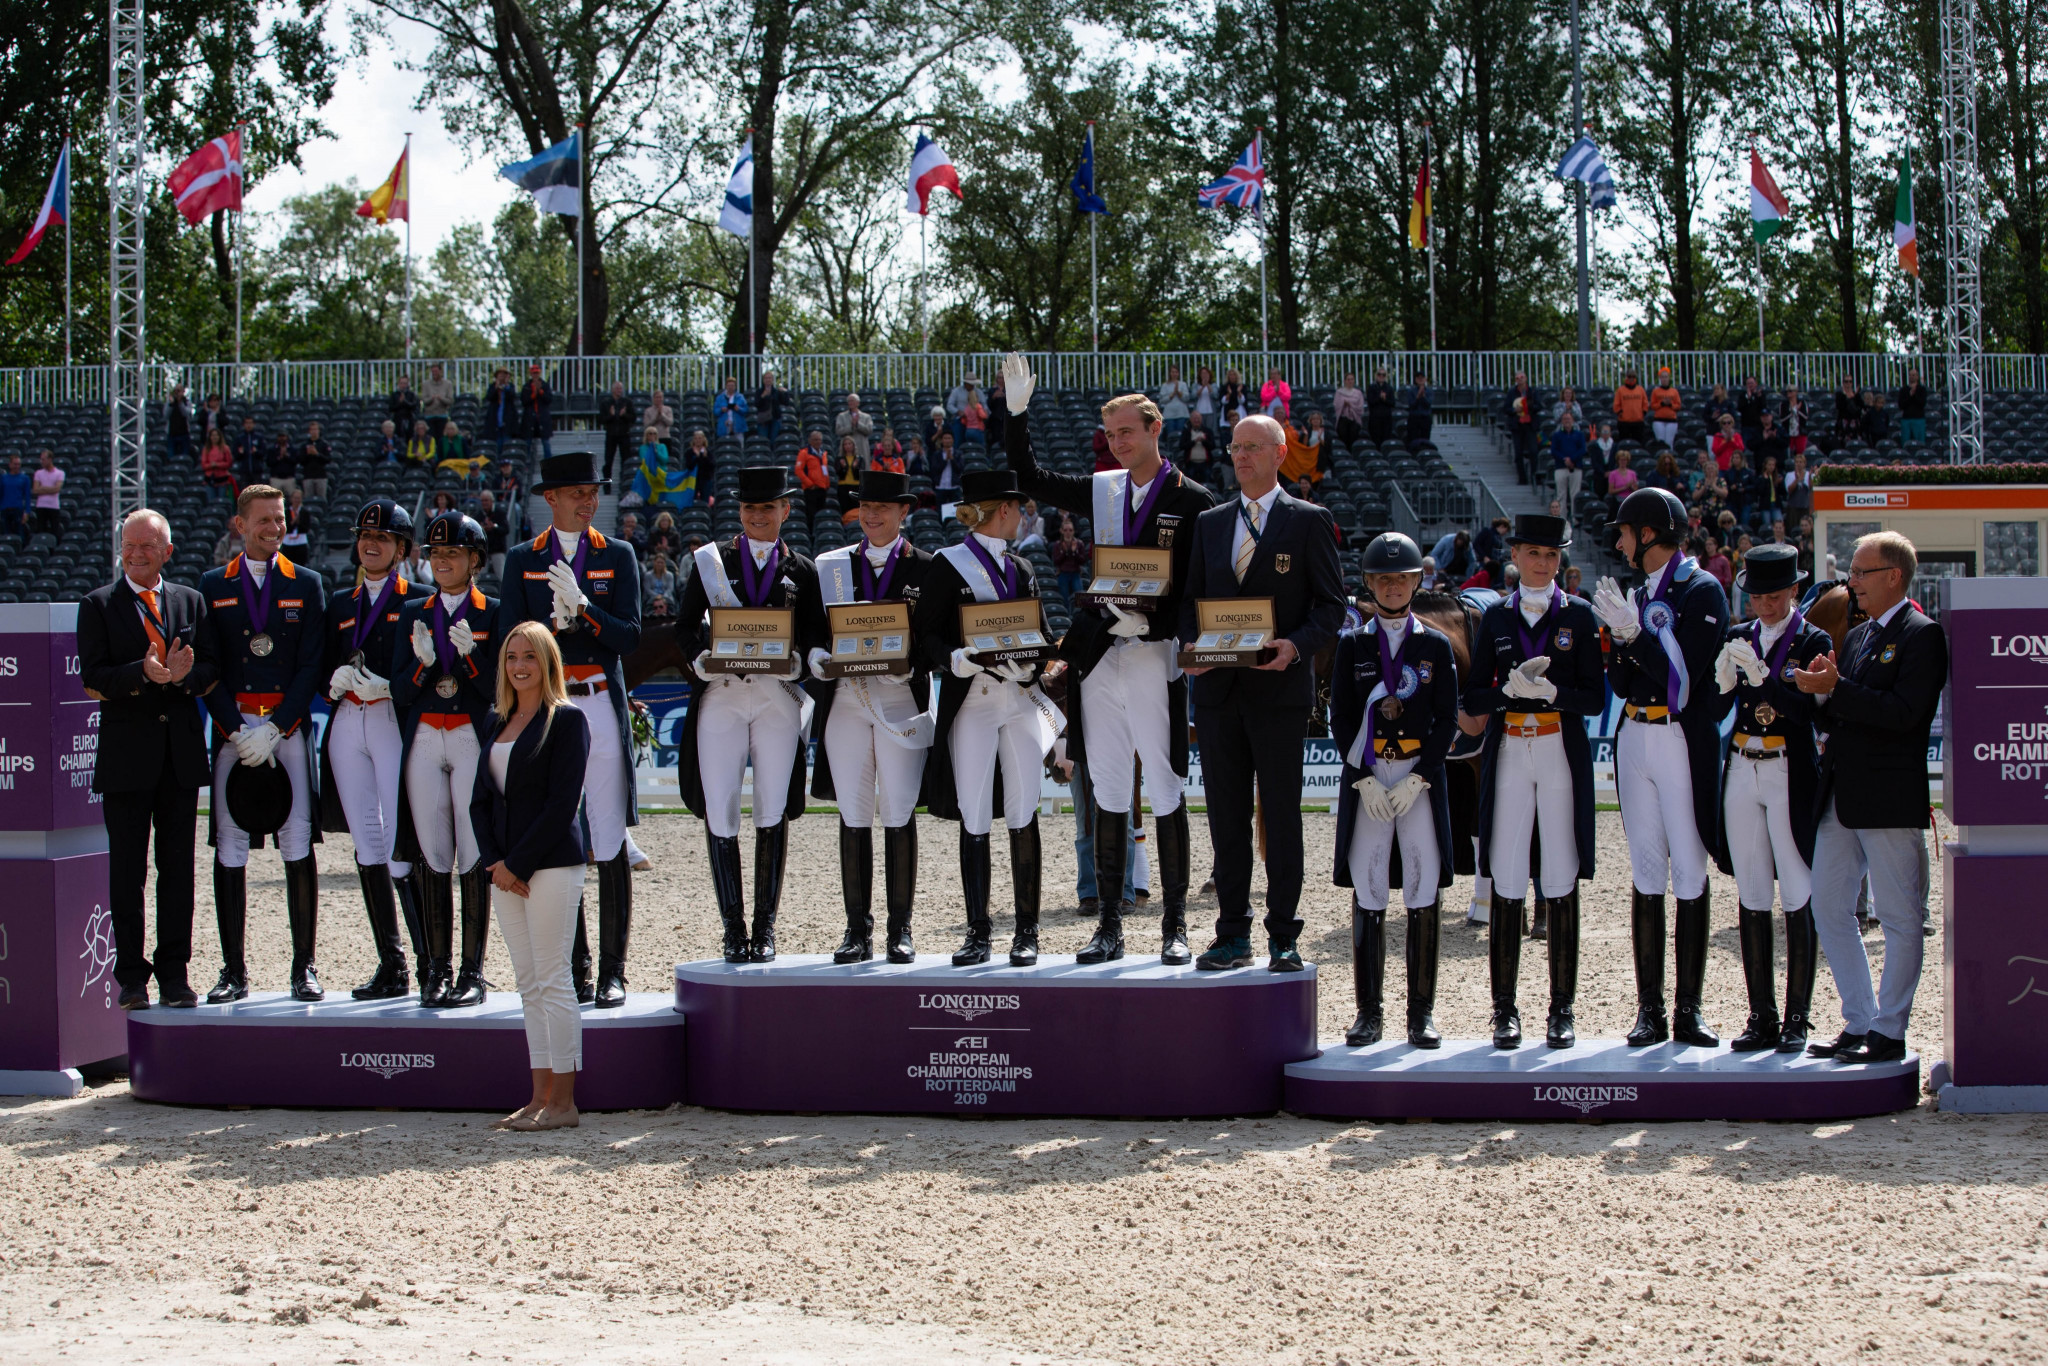 Germany clinch dressage gold at FEI European Championships